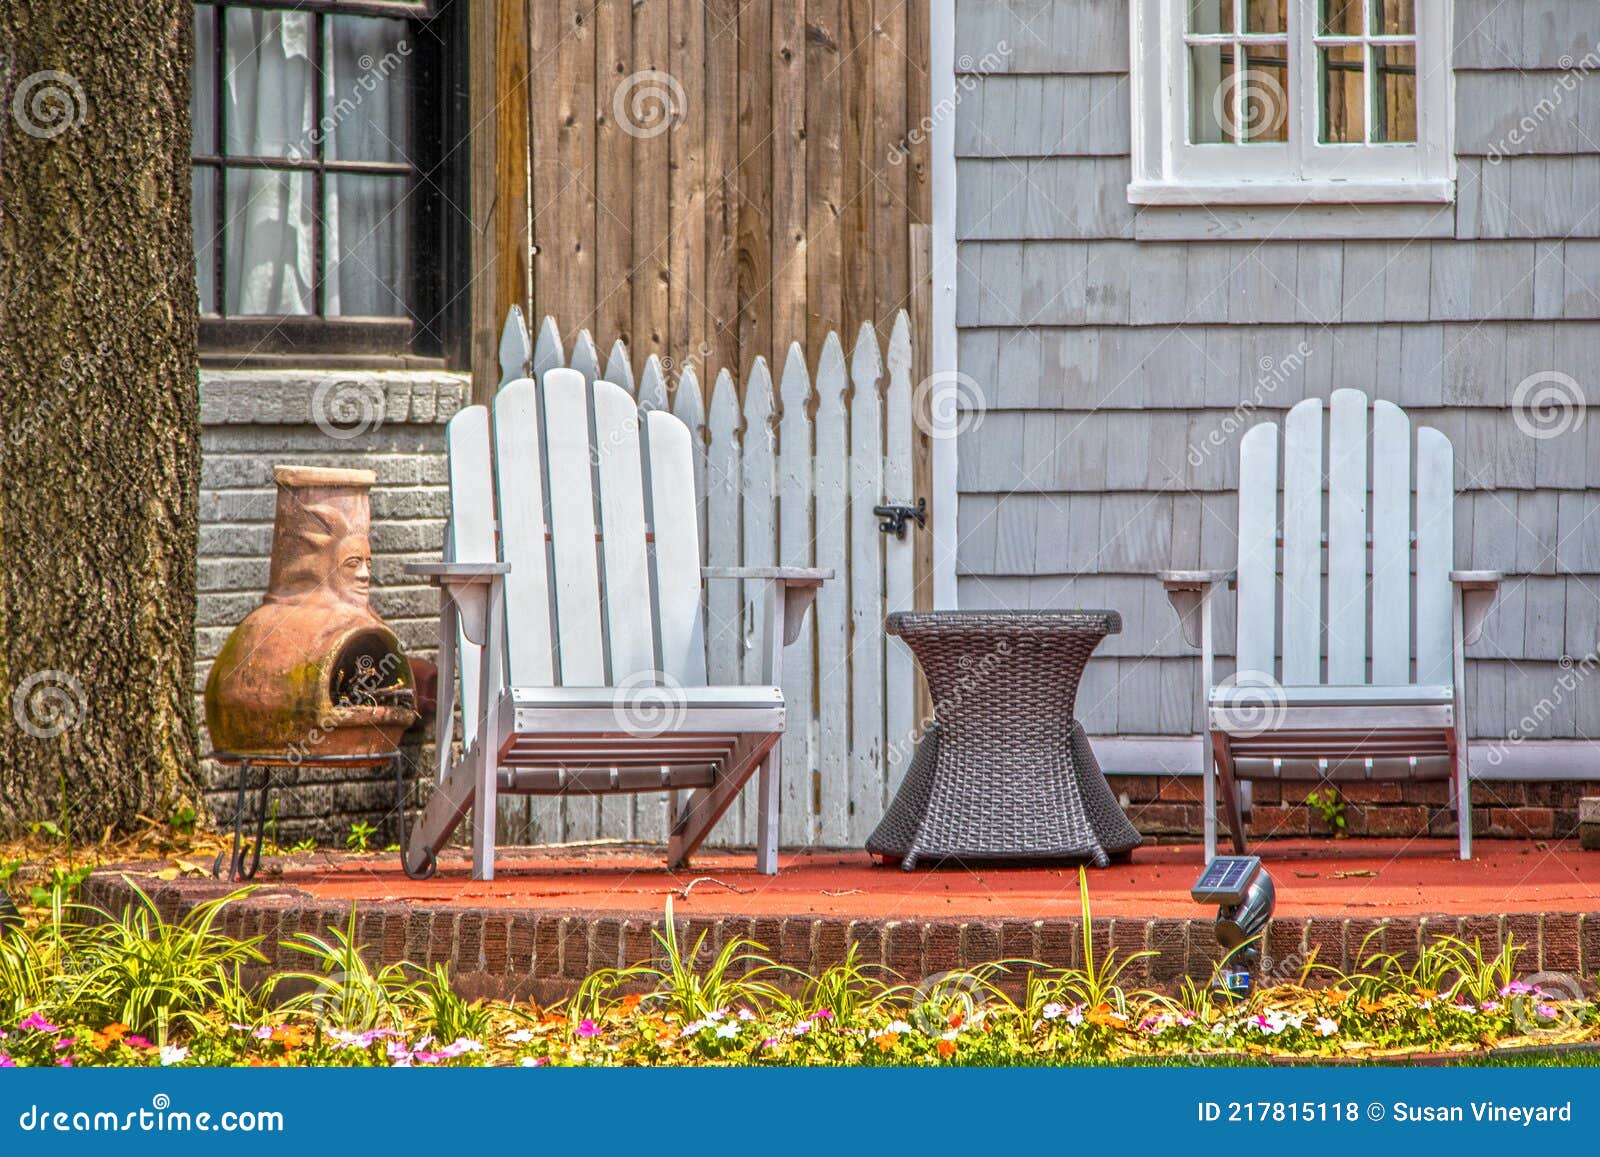 adirondack chairs and chiminea and wicker table on patio under stree in front of house with grey wooden siding and picket fence